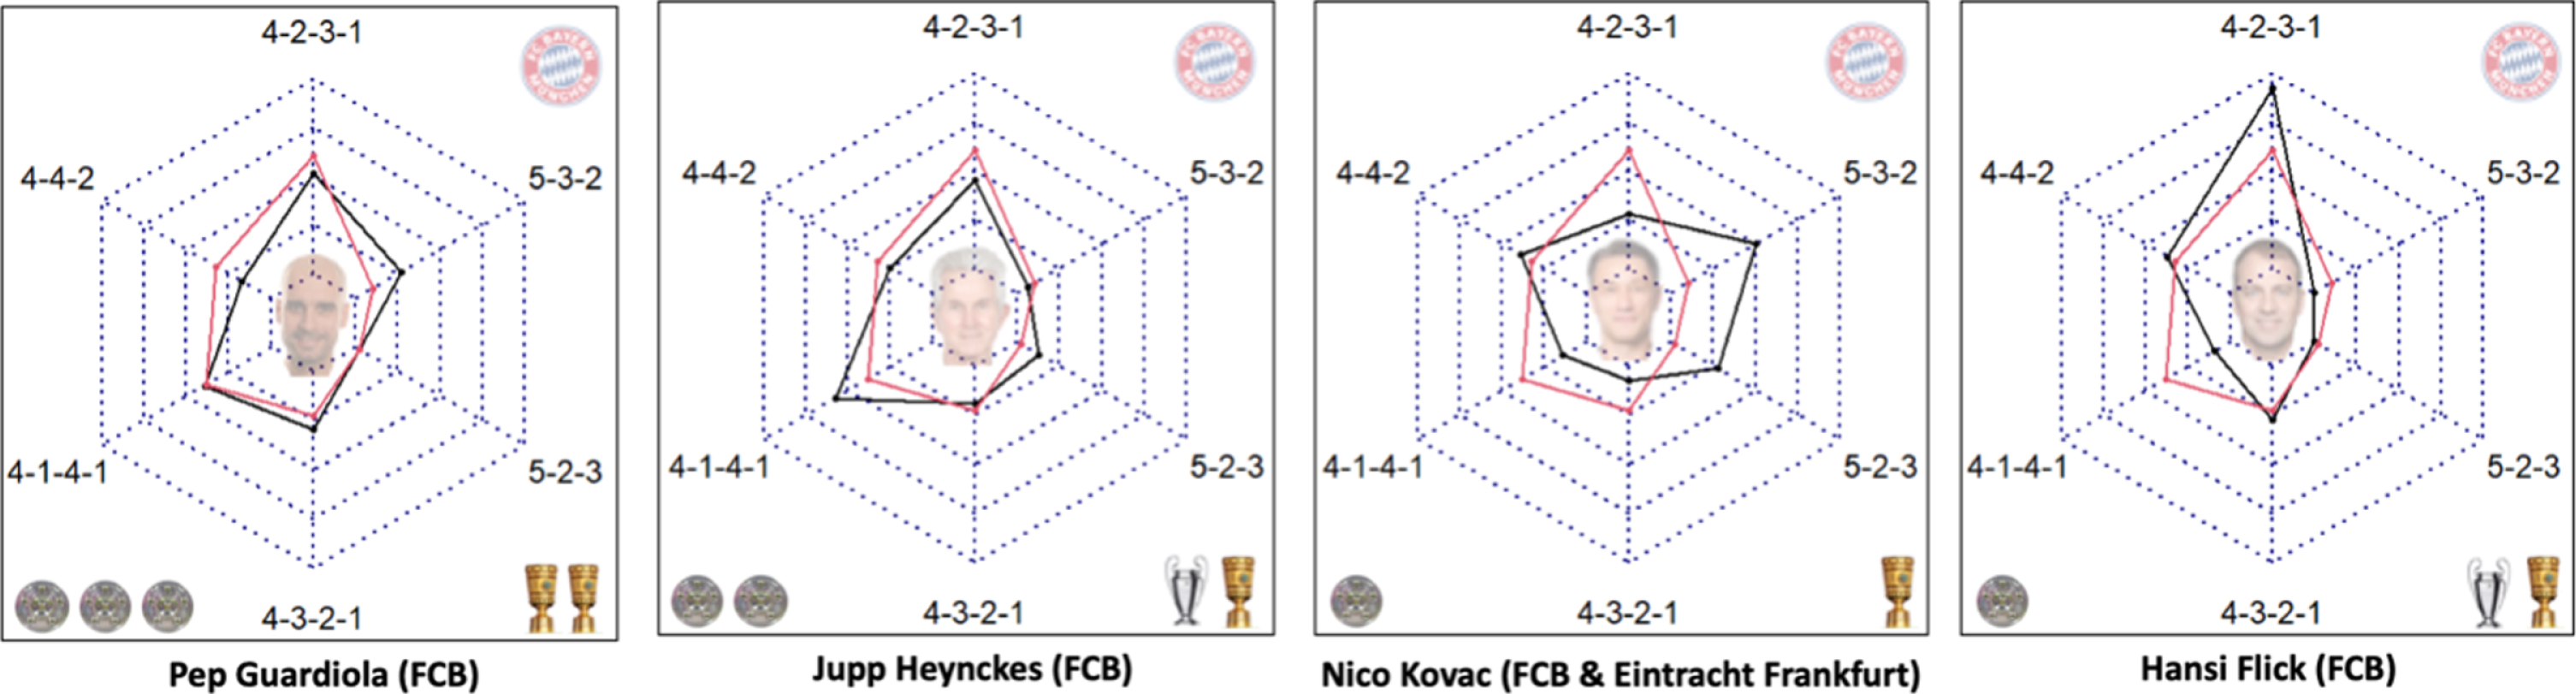 FC Bayern Munich coaches by their formation (black) in comparison to the overall Bayern profile (red). The data from all coaches and FC Bayern are aggregated over the seasons 2013/2014 to 2019/2020. The trophies (Bundesliga Championship, DFB-Cup and UEFA Champions-League) that each coach earned at his time at FC Bayern are displayed.